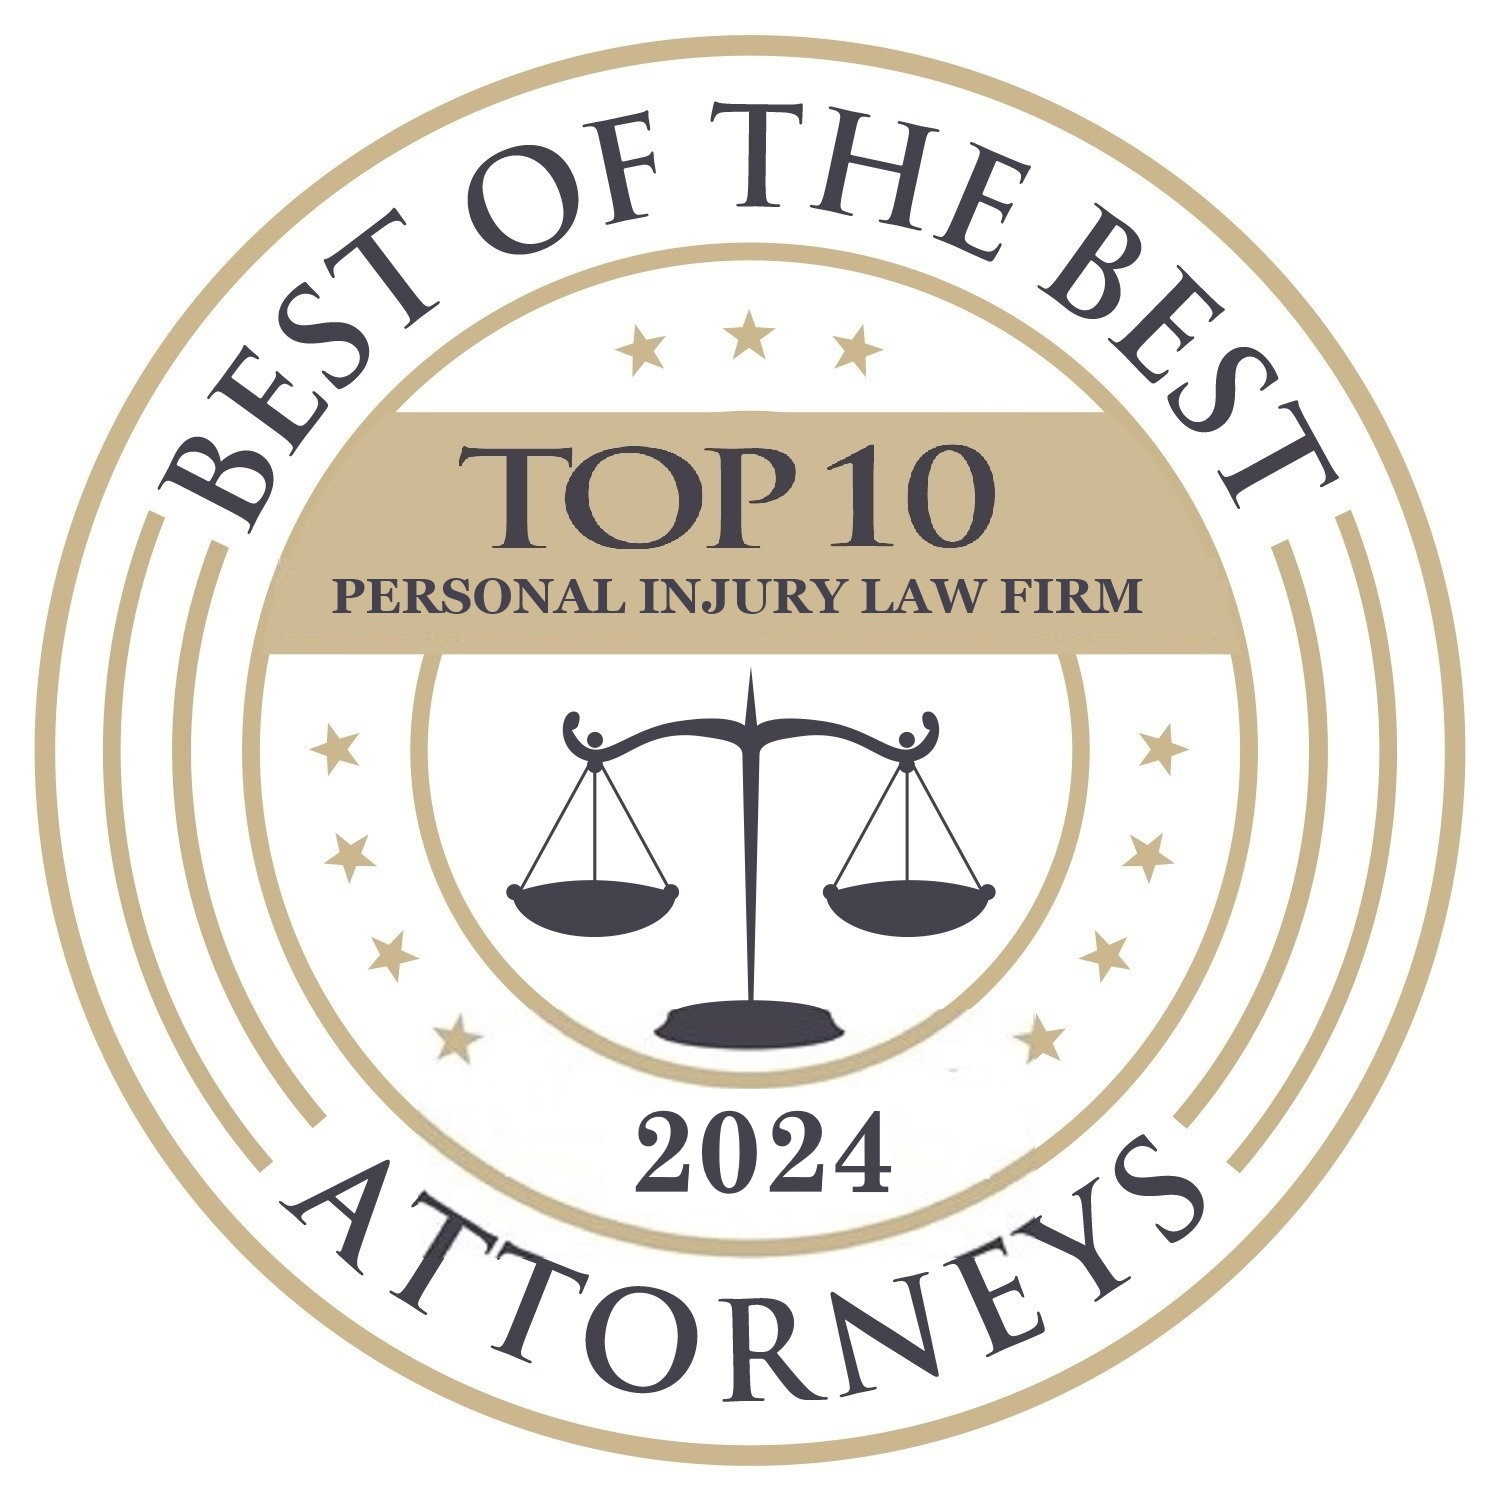 Best of the Best Top 10 Personal Injury Law Firm 2024